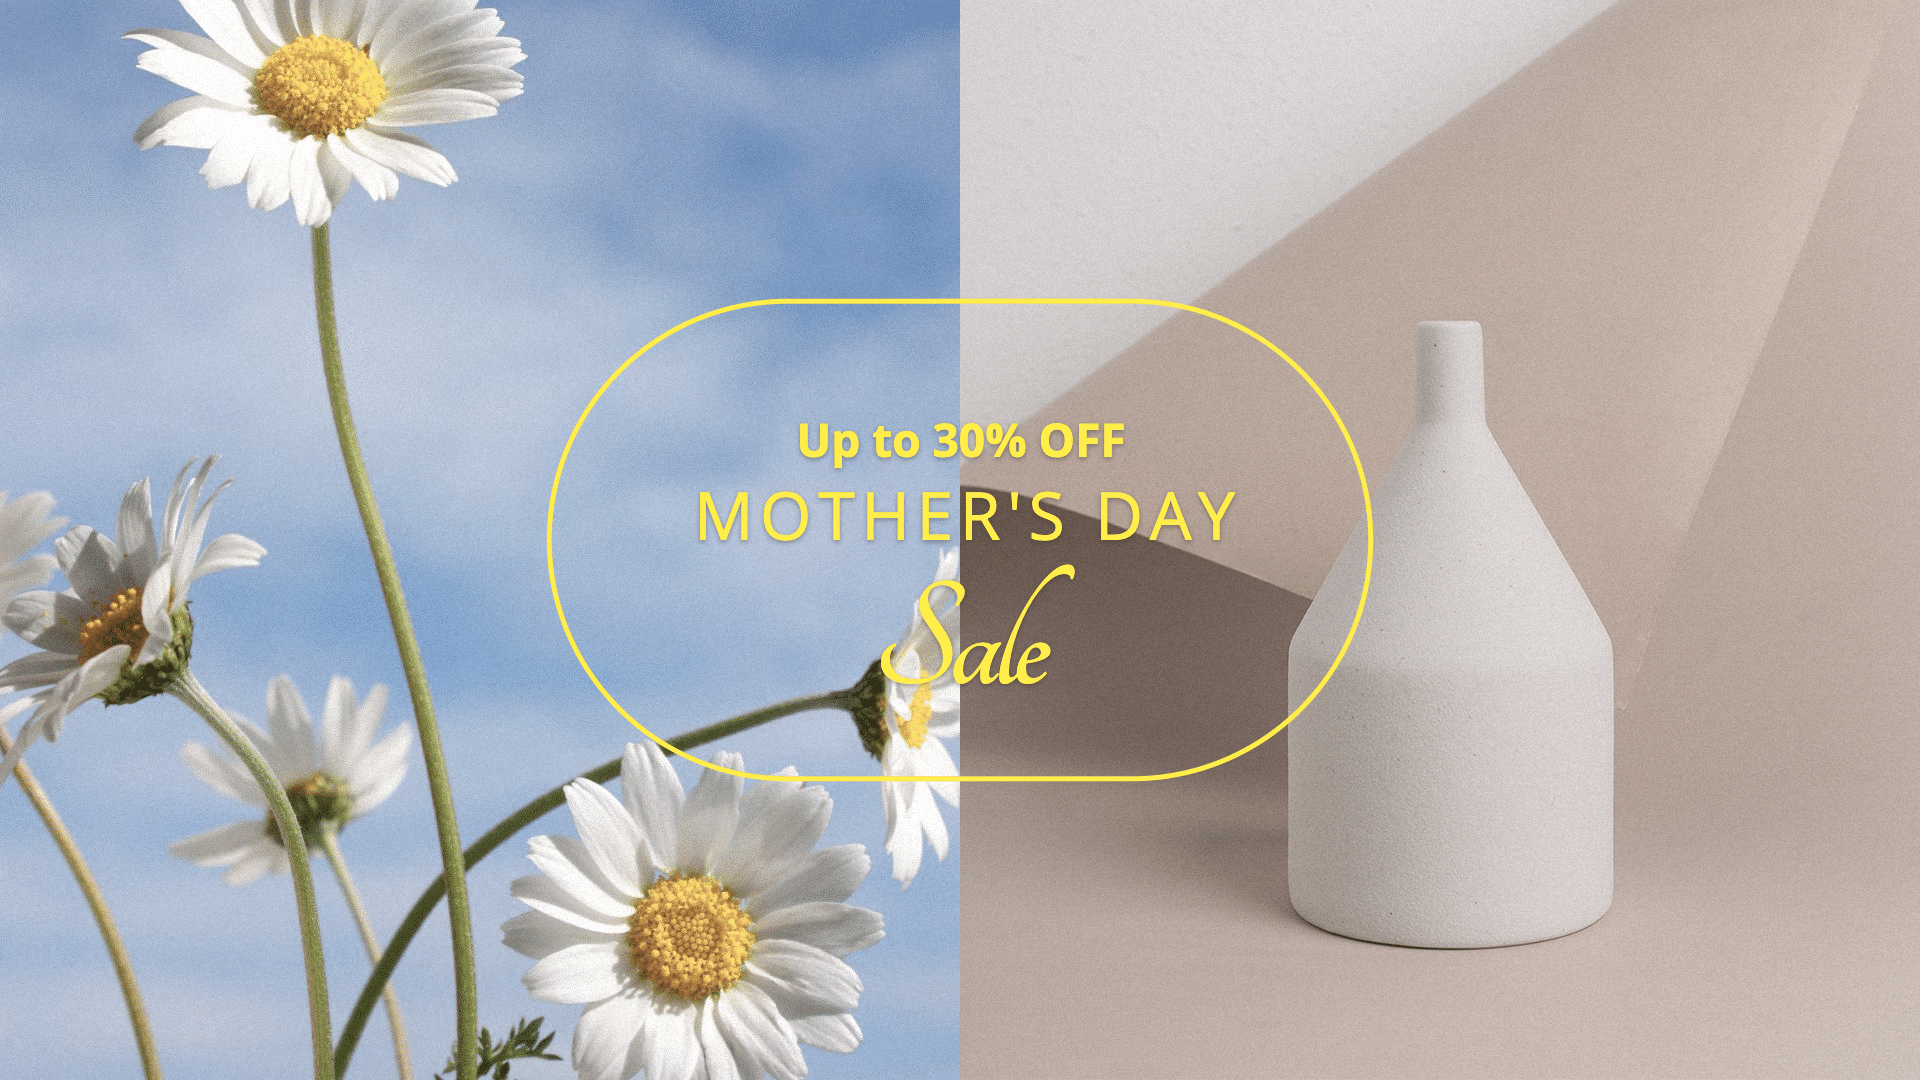 Mother's Day Festival Furniture Promotion Ecommerce Banner预览效果